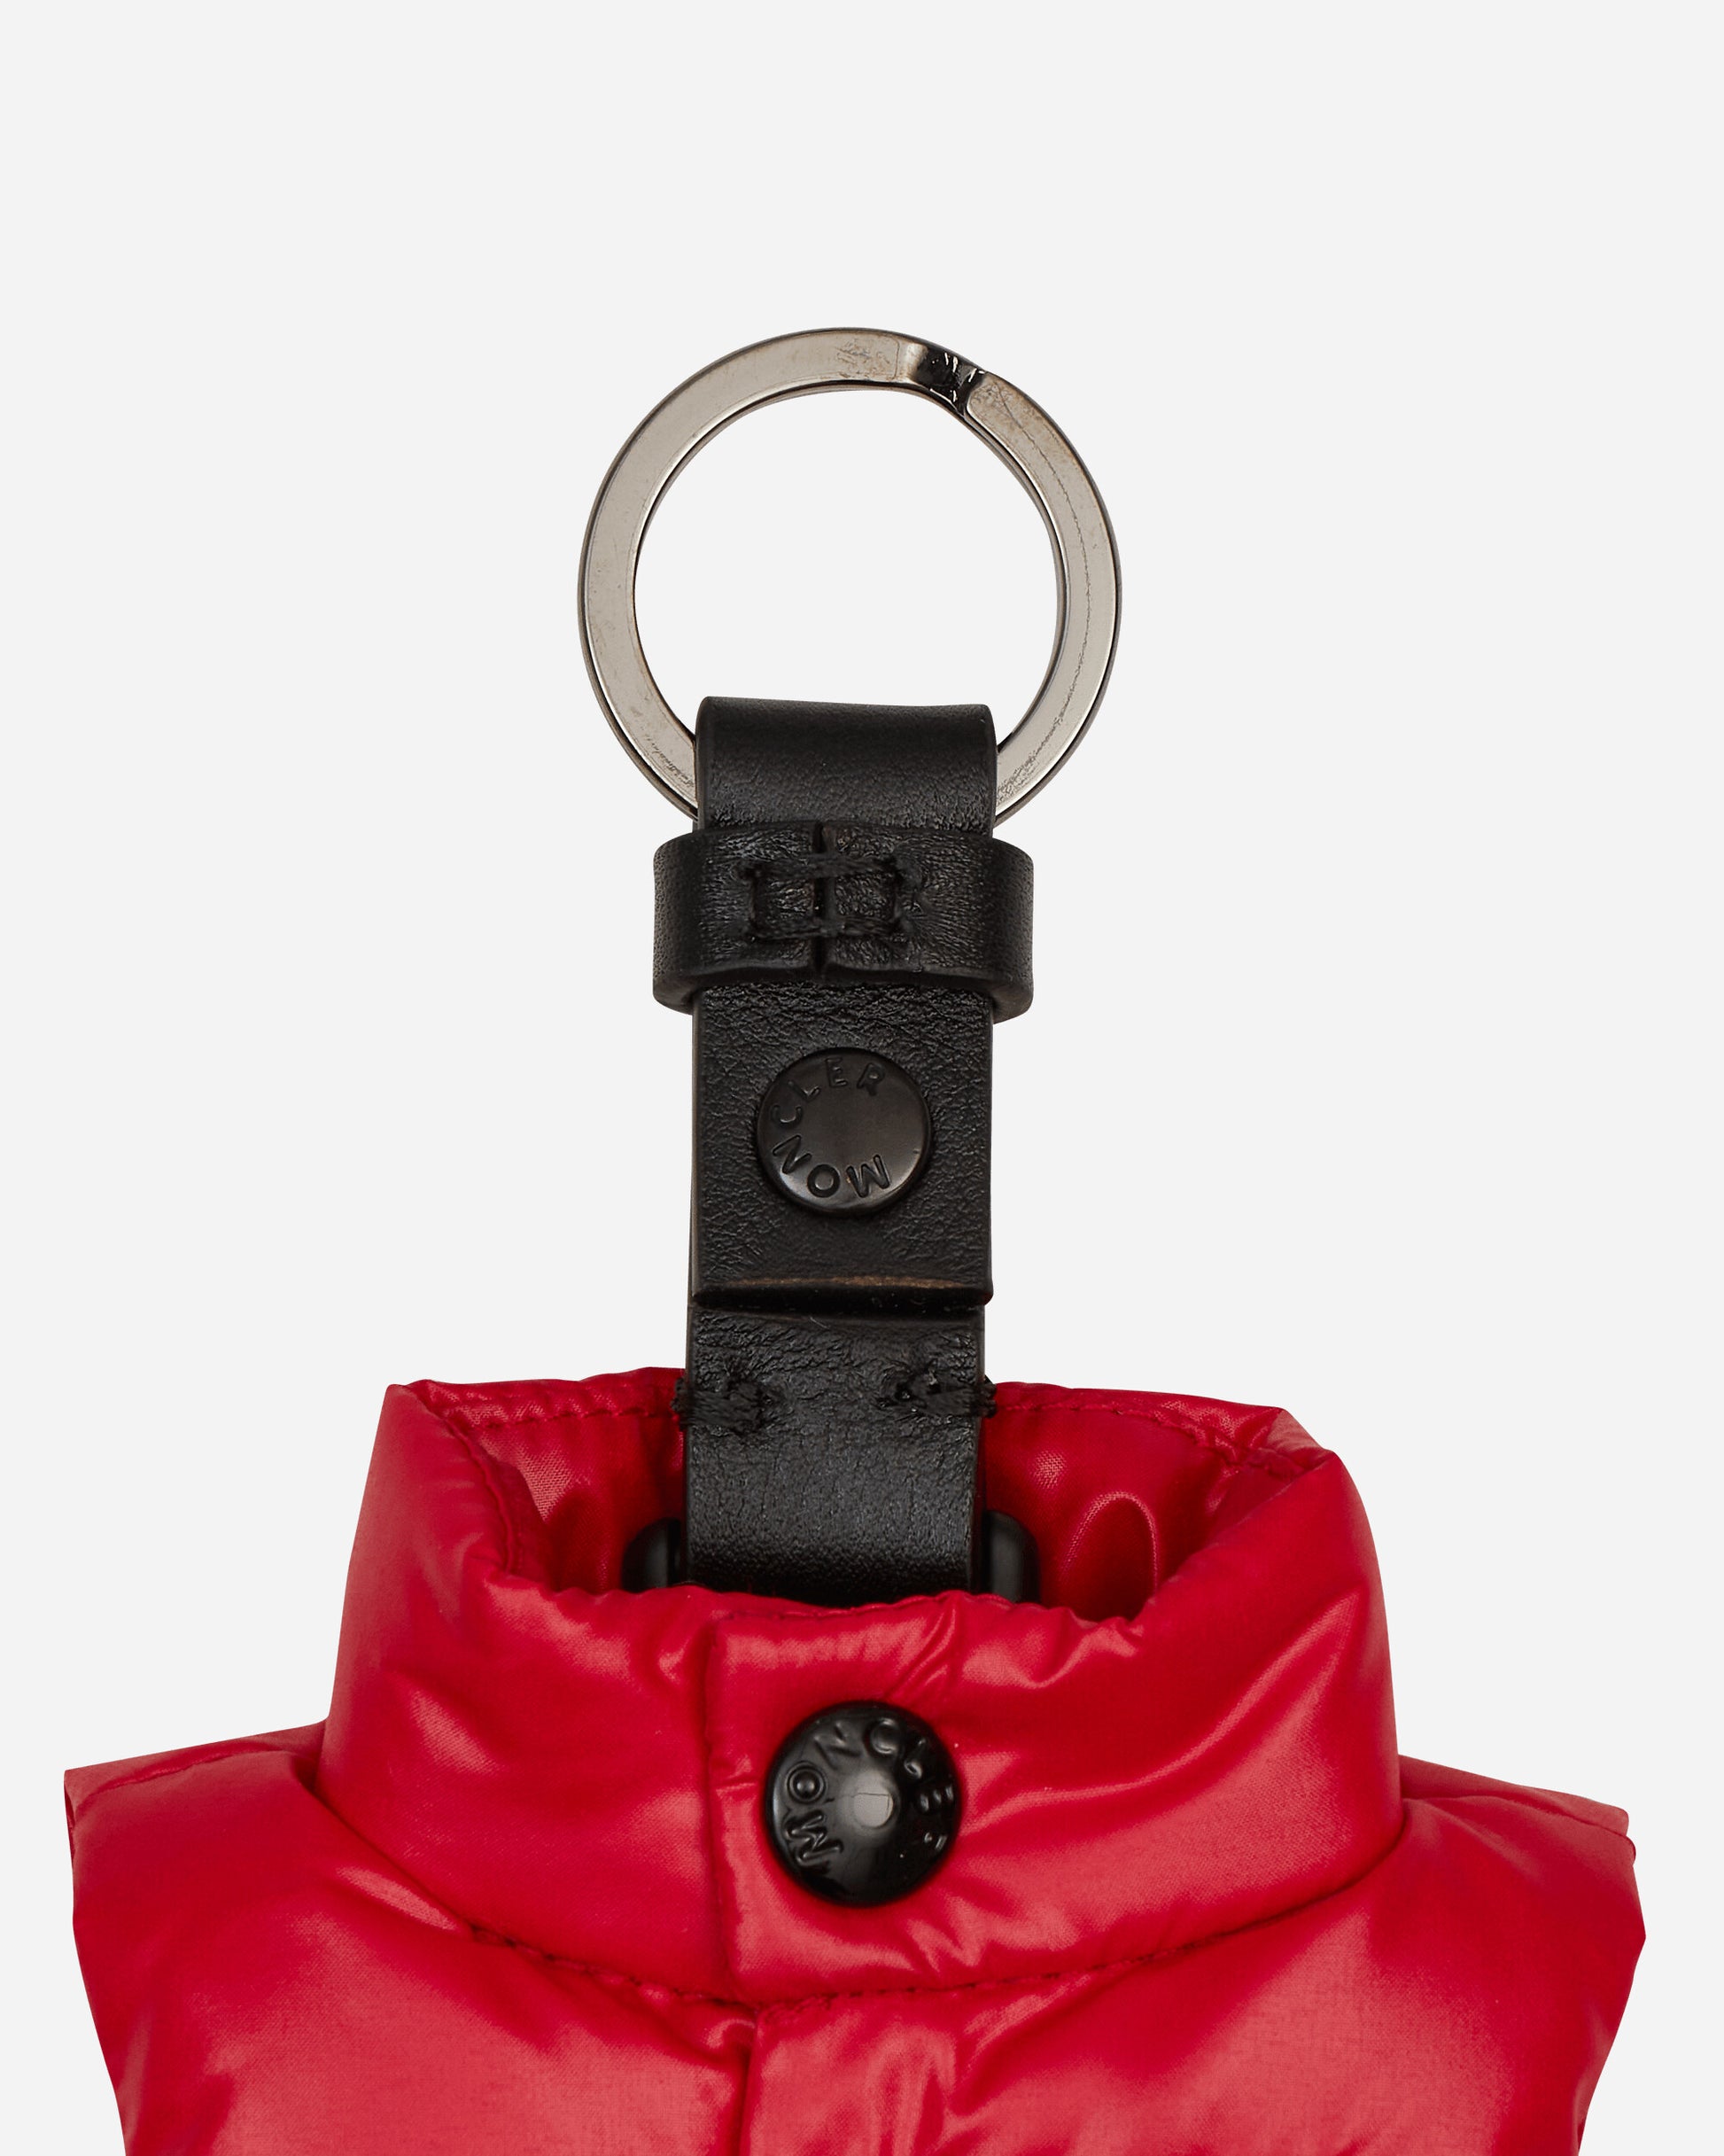 Moncler Vest Key Ring Red Small Accessories Keychains 6F00003M4058 455